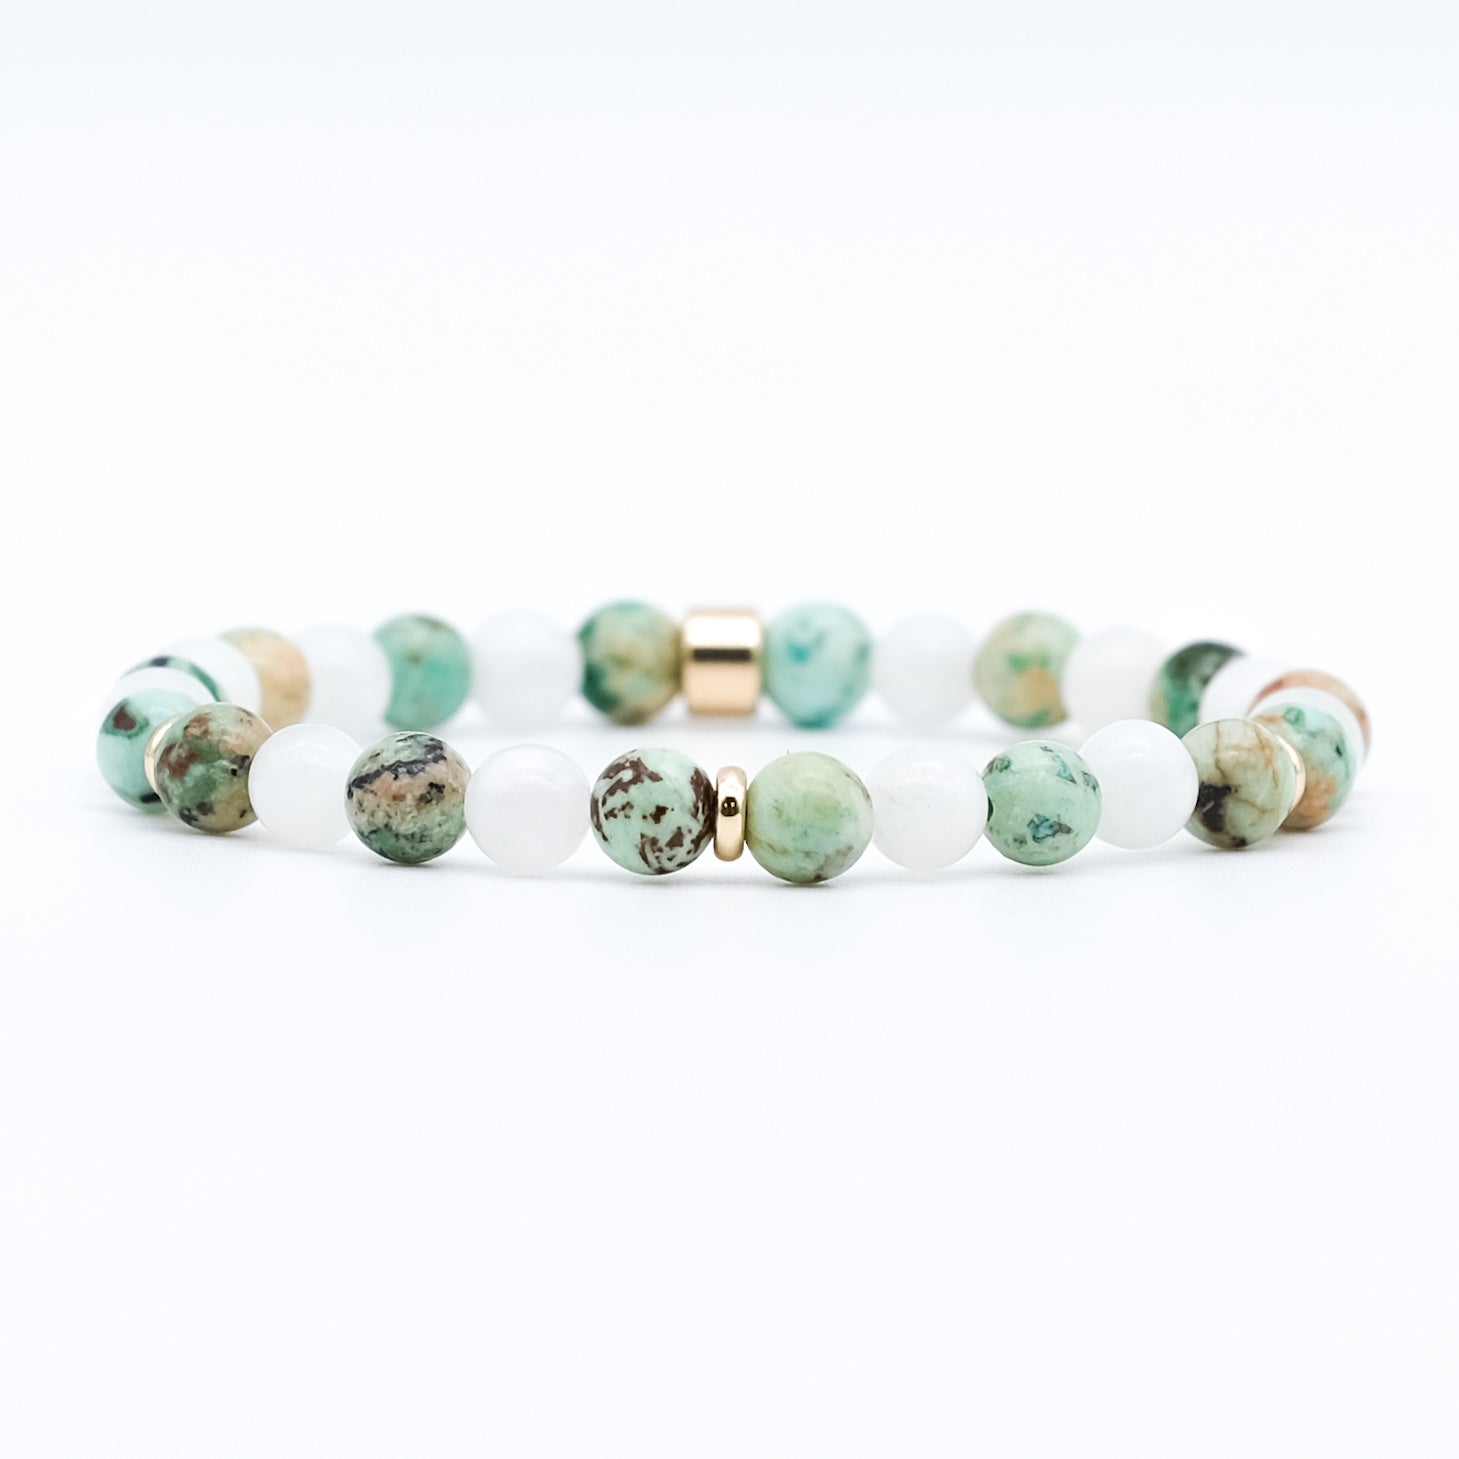 A moonstone and chrysocolla gemstone bracelet in 6mm beads with gold accessories